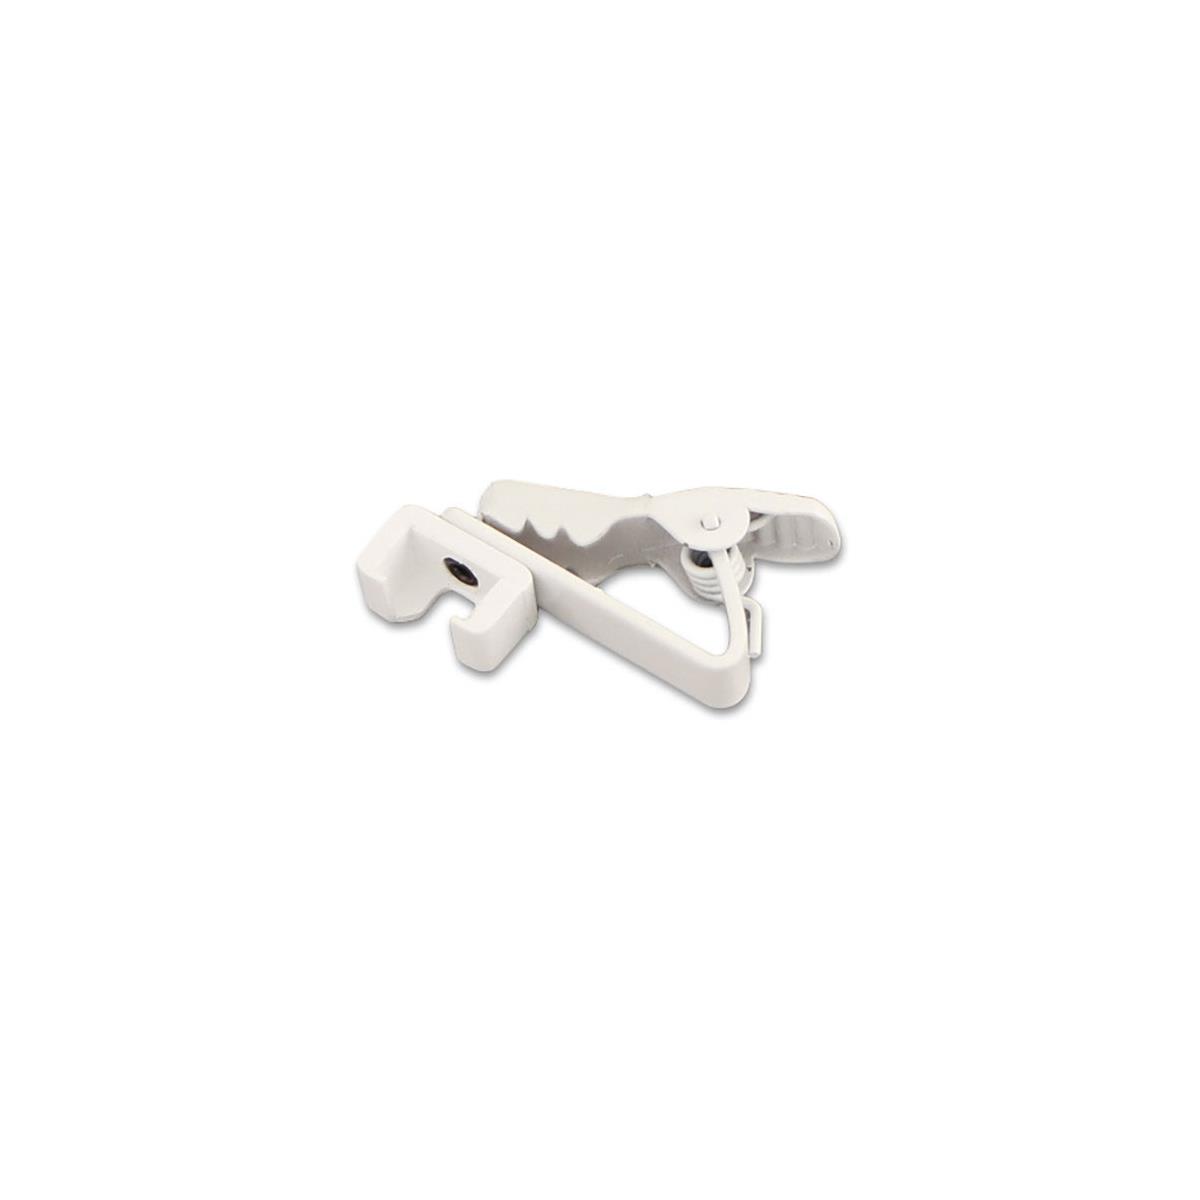 Image of Voice Technologies AC/W Alligator Clip for VT500 and VT506 Microphones